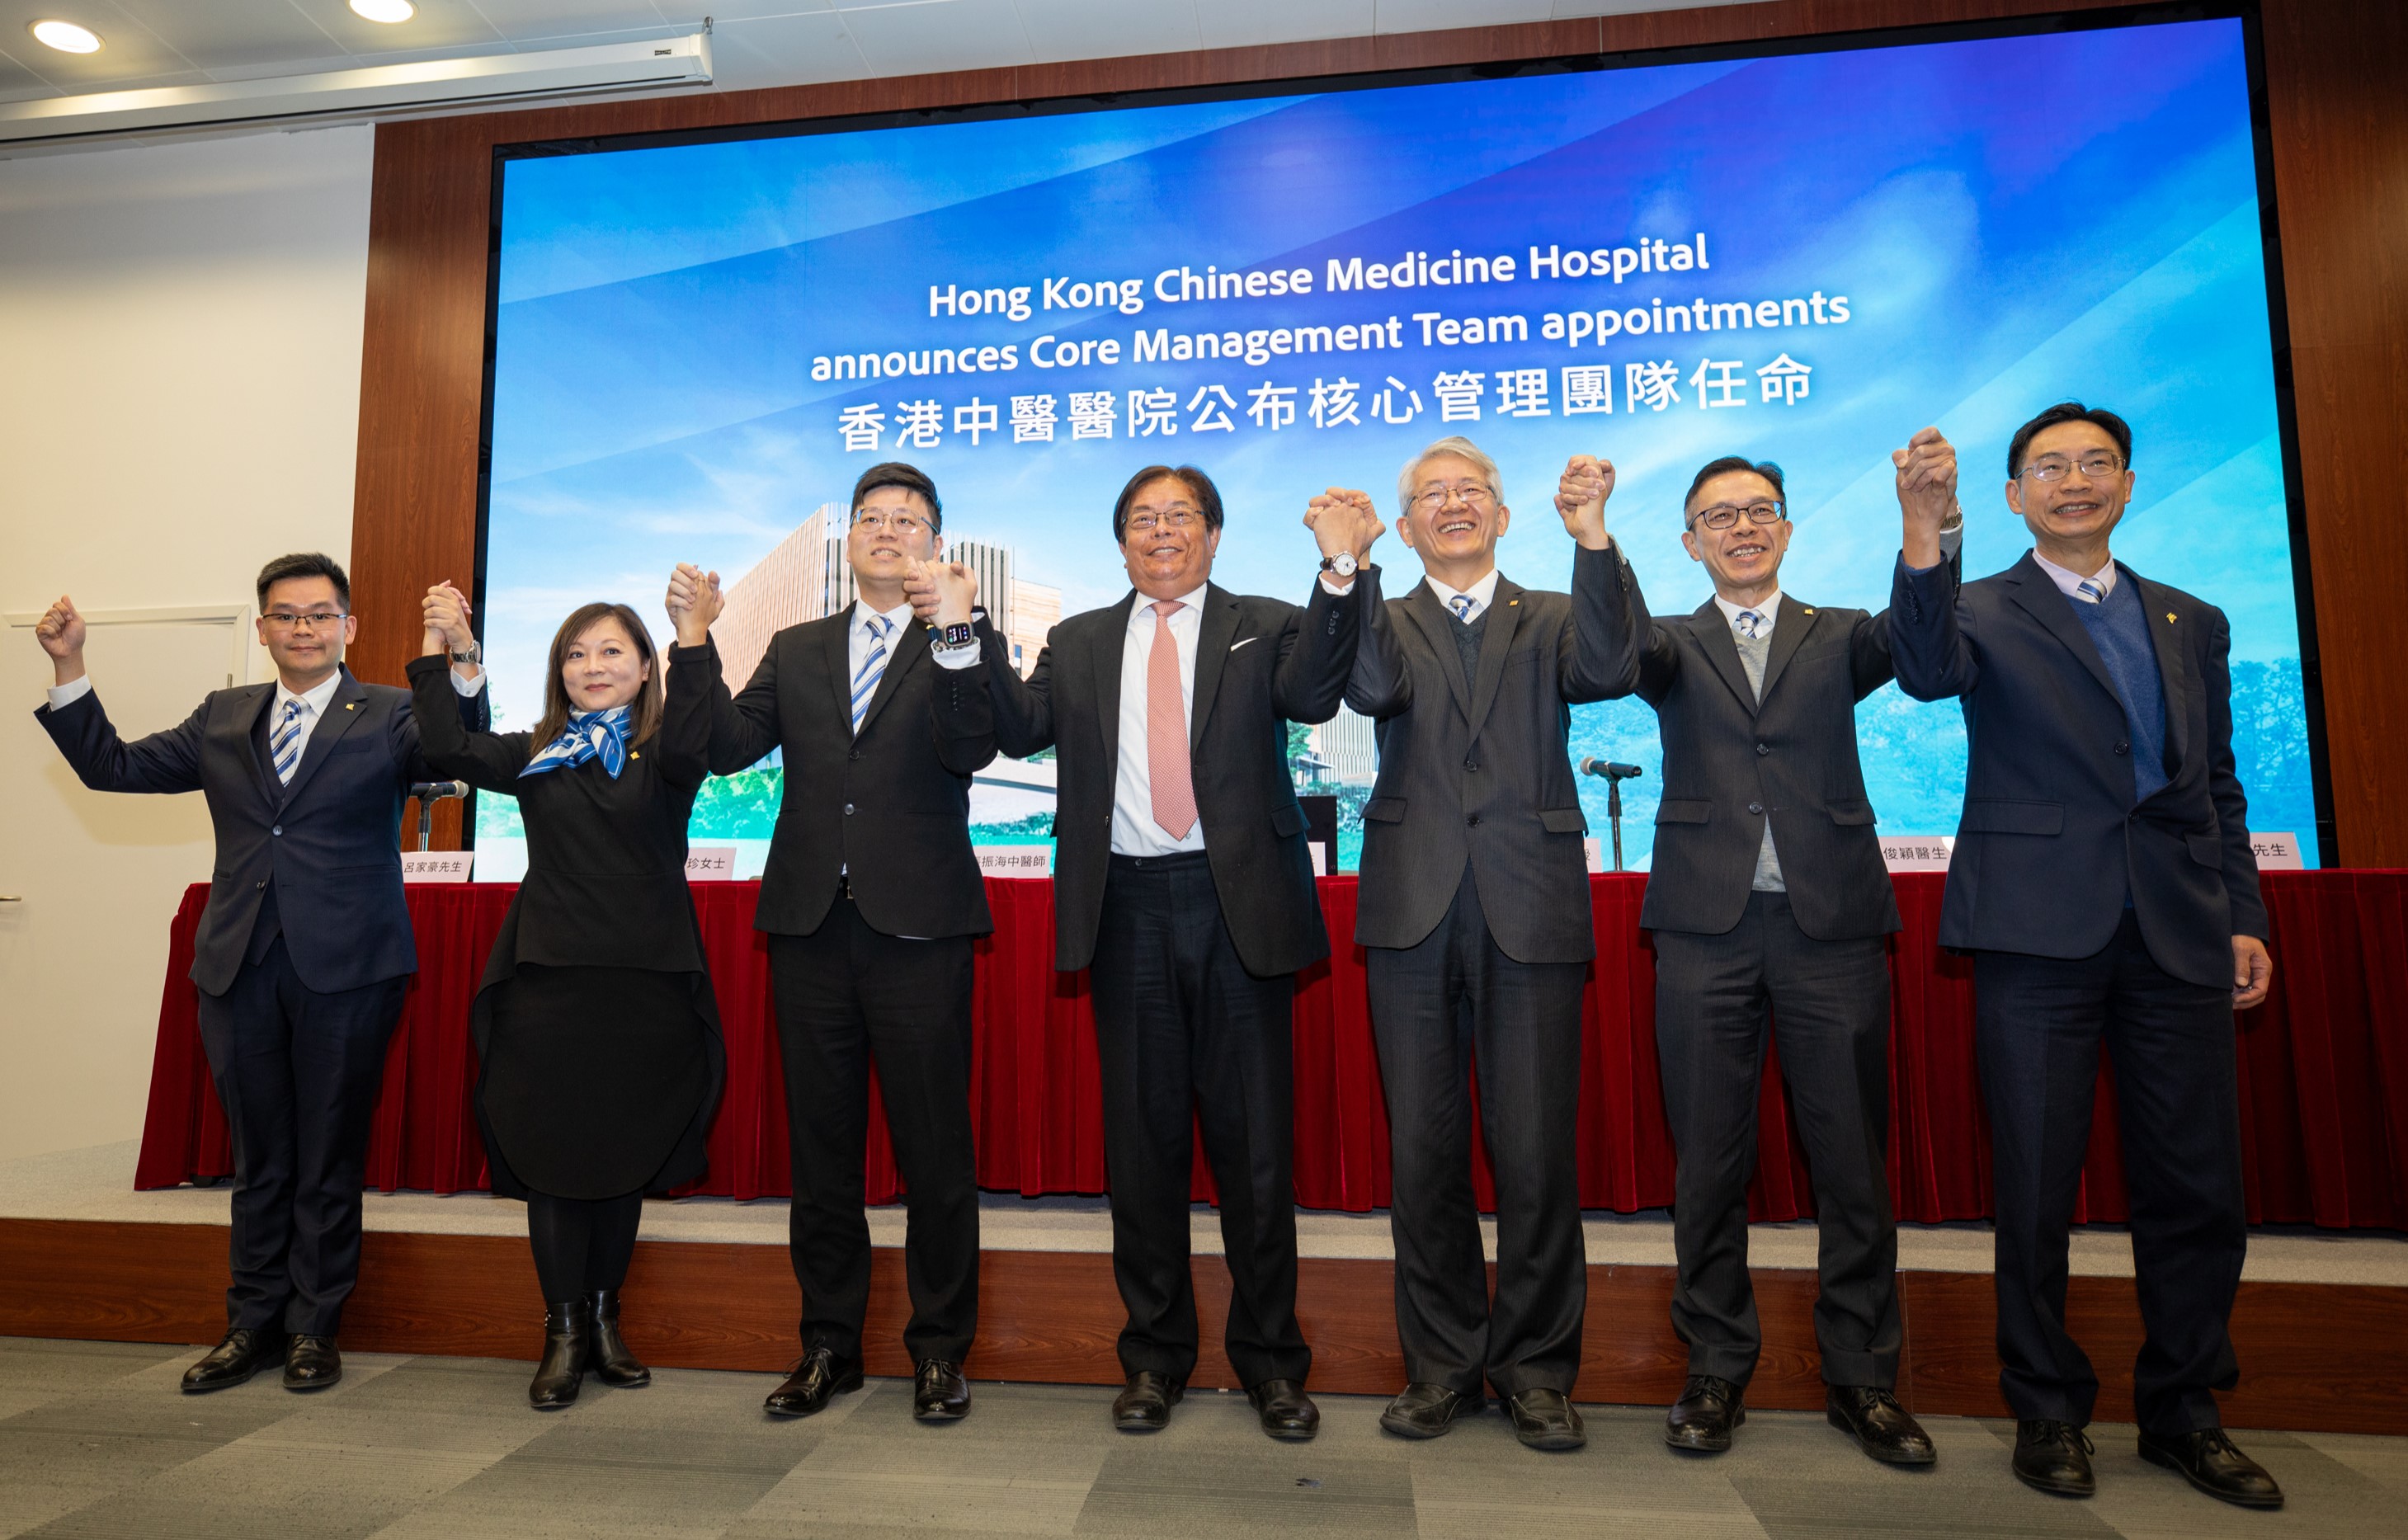 Mr Huen Wong, Chairman of the Board of Directors of the HKBU Chinese Medicine Hospital Company Limited (centre), and the six Core Management Team members. They are Professor Bian Zhaoxiang, Hospital Chief Executive (3rd right); Mr Cheung Chun-hoi, Deputy Hospital Chief Executive (Chinese Medicine) (3rd left); Dr Lau Chun-wing, Deputy Hospital Chief Executive (Western Medicine) (2nd right); Ms Ellie Chon Mei-chun, General Manager (Nursing) (2nd left); Mr Leo Law Kwong-kuen, General Manager (Administrative Services & HR) (1st right); and Mr Leo Lui Ka-ho, General Manager (Finance) (1st left).